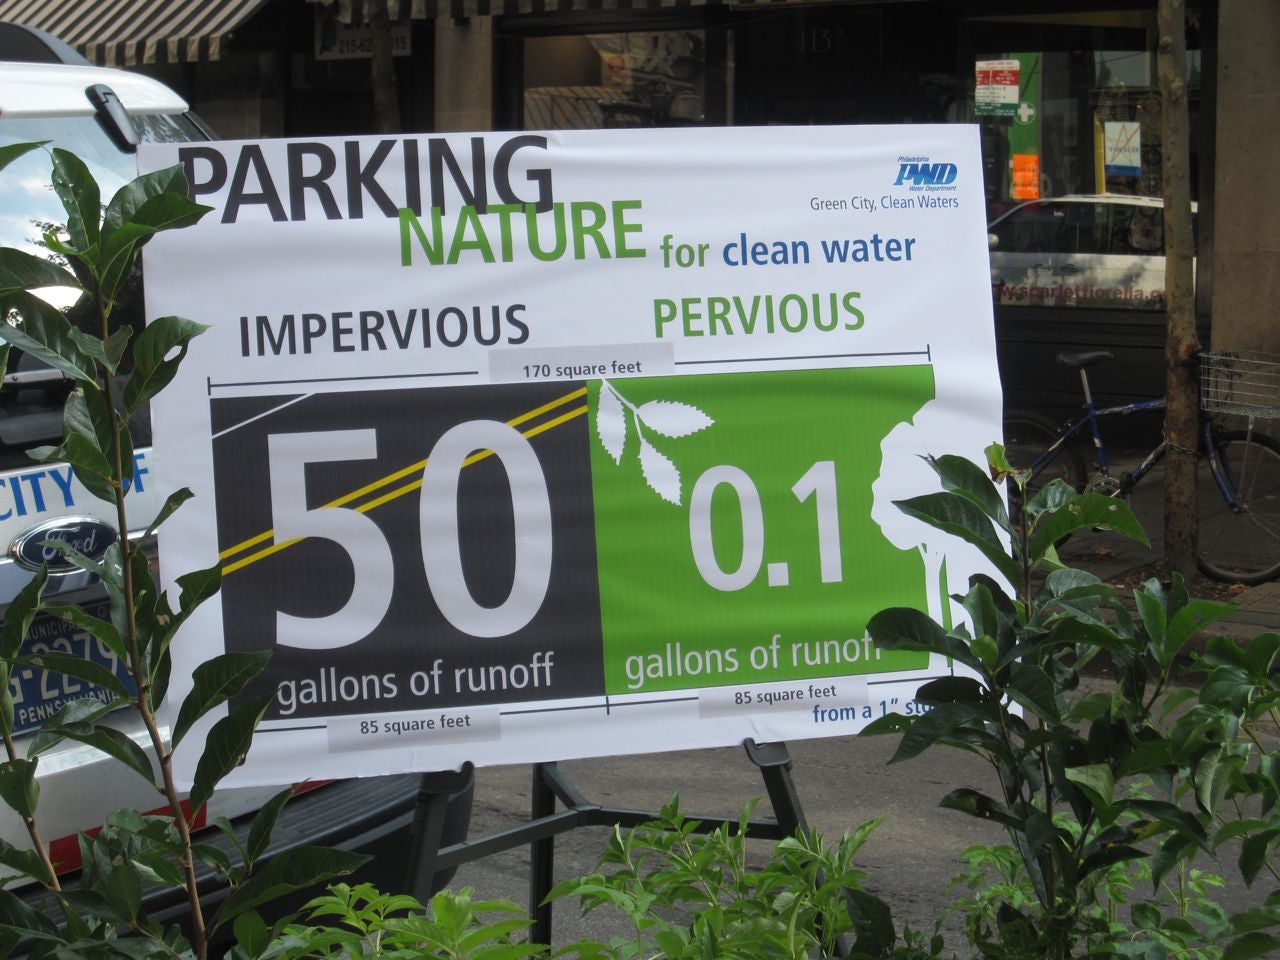 Part of the Water Department's PARK(ing) Day spot.